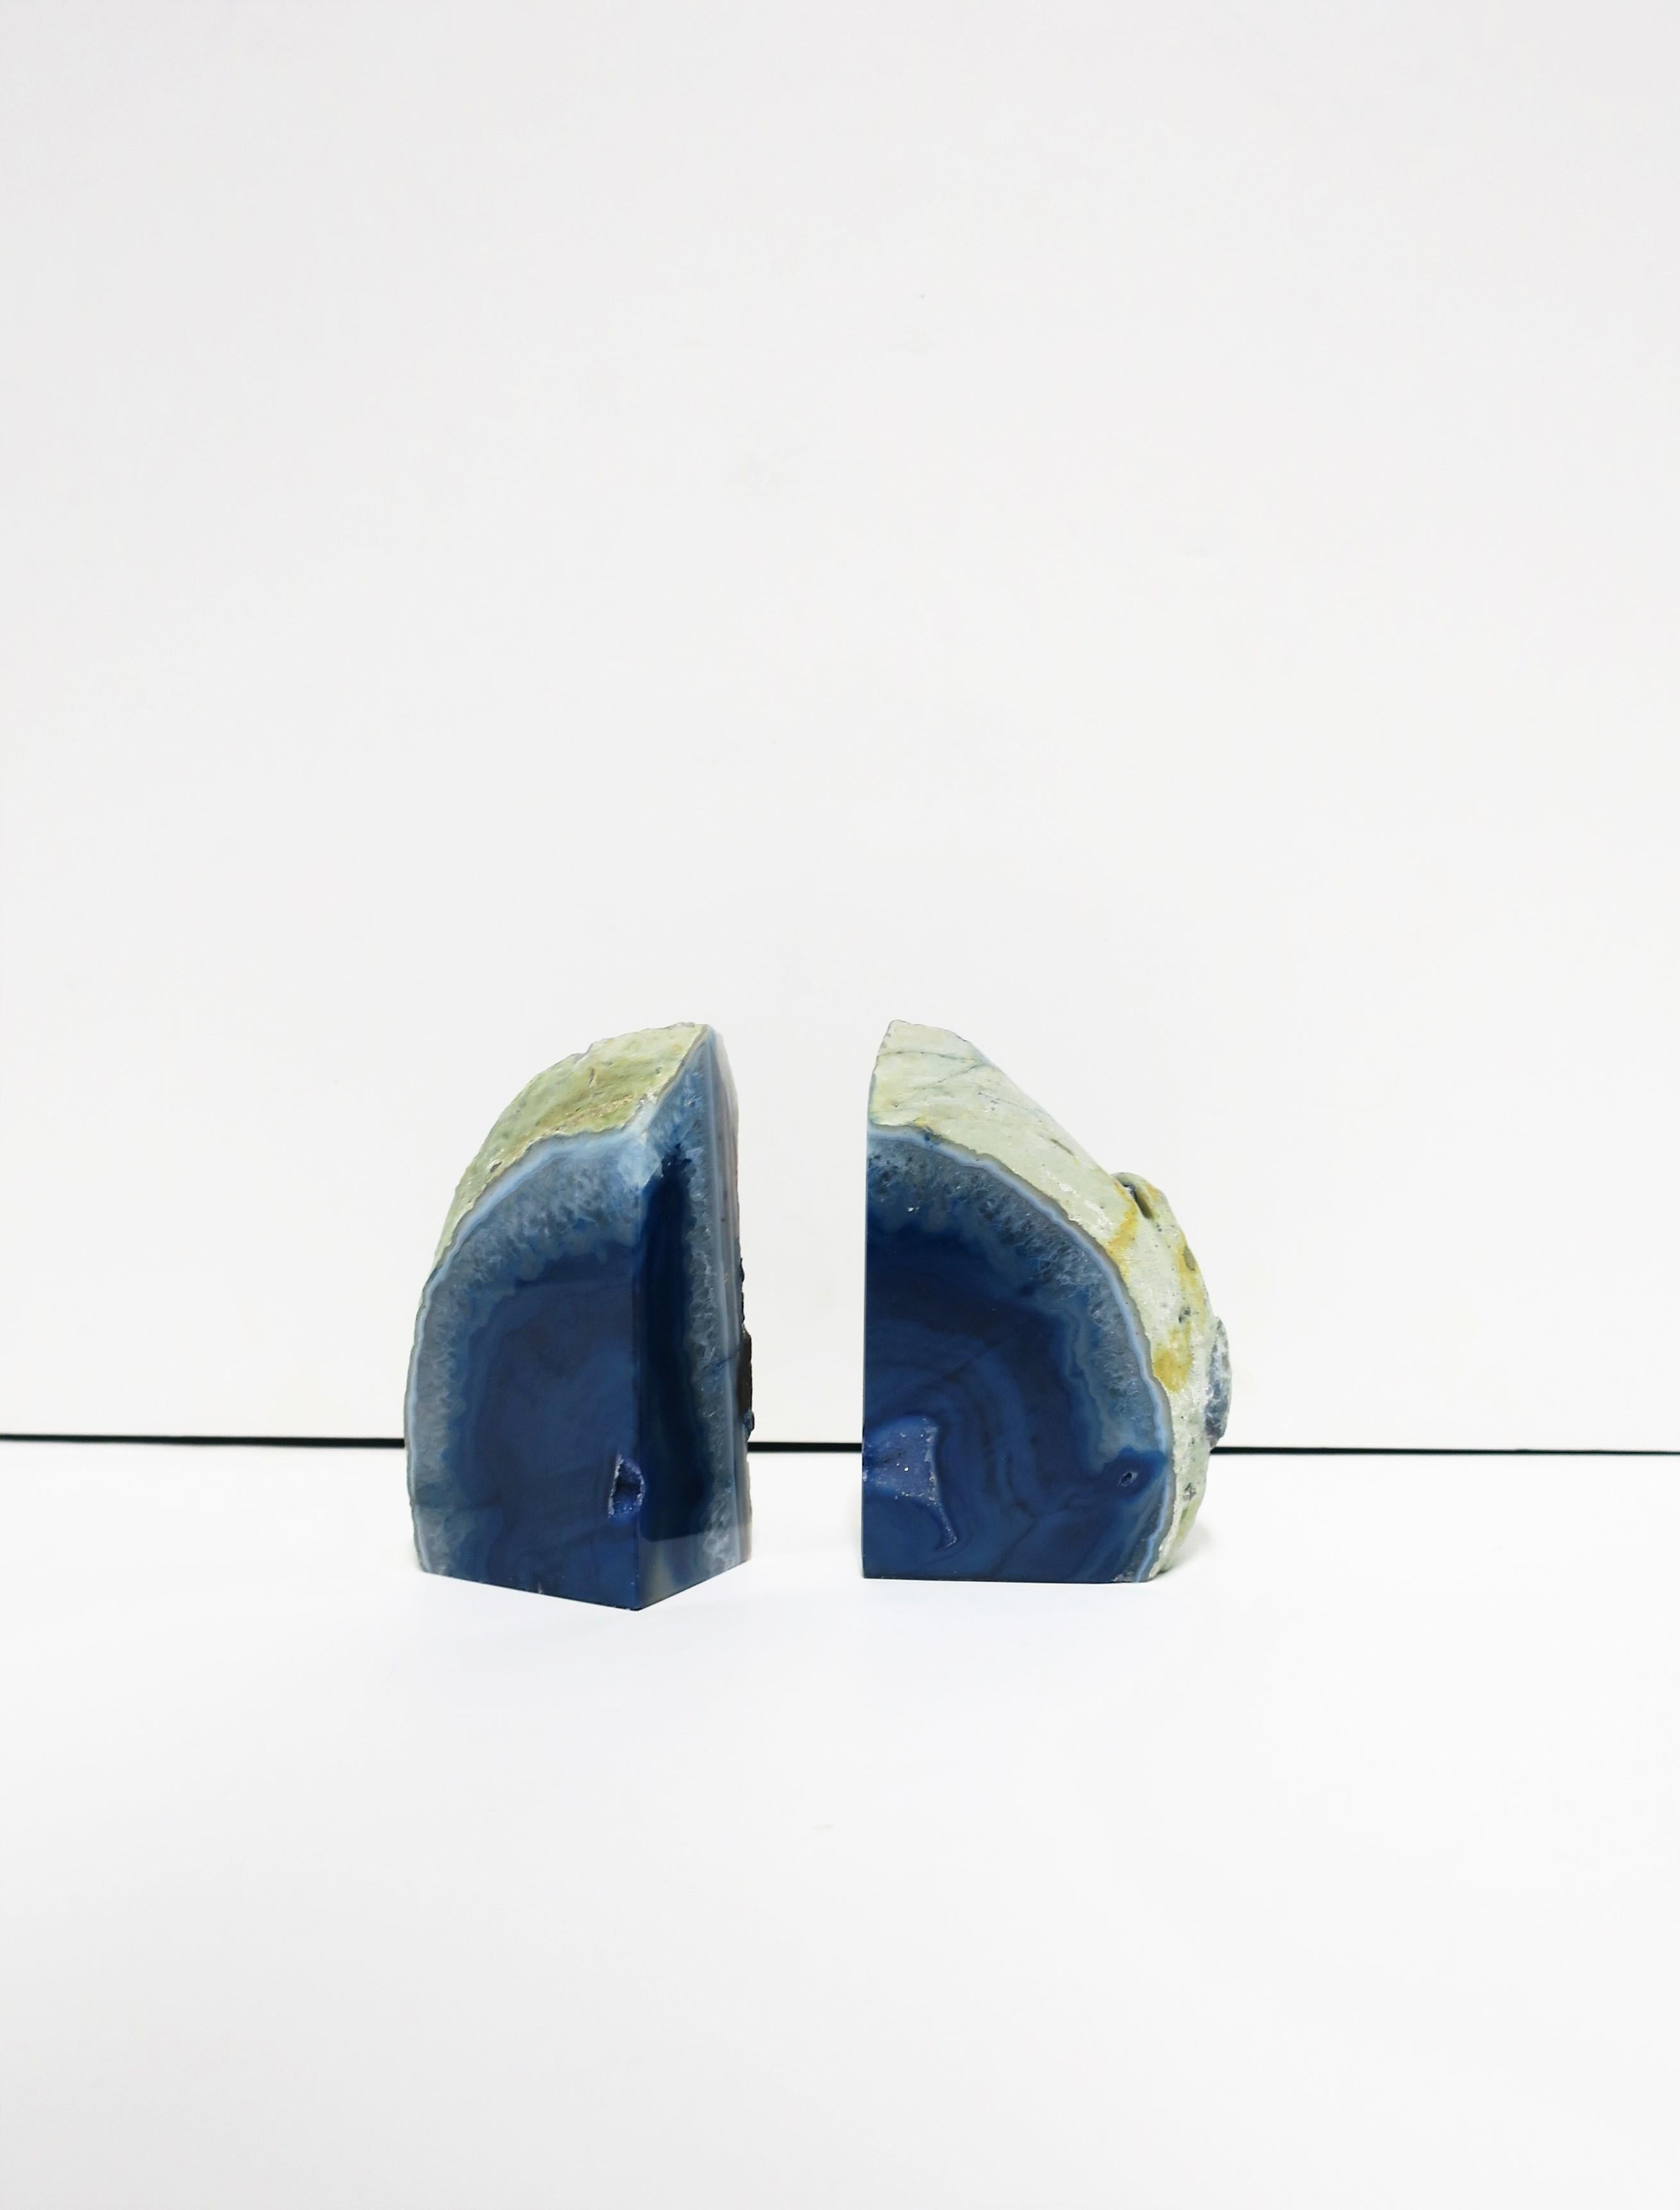 A beautiful pair of cobalt blue natural agate bookends or decorative objects, circa 20th century, Brazil. These agate bookends may work well on a bookshelf or equally well as standalone decorative objects together or separate (as shown.) Each